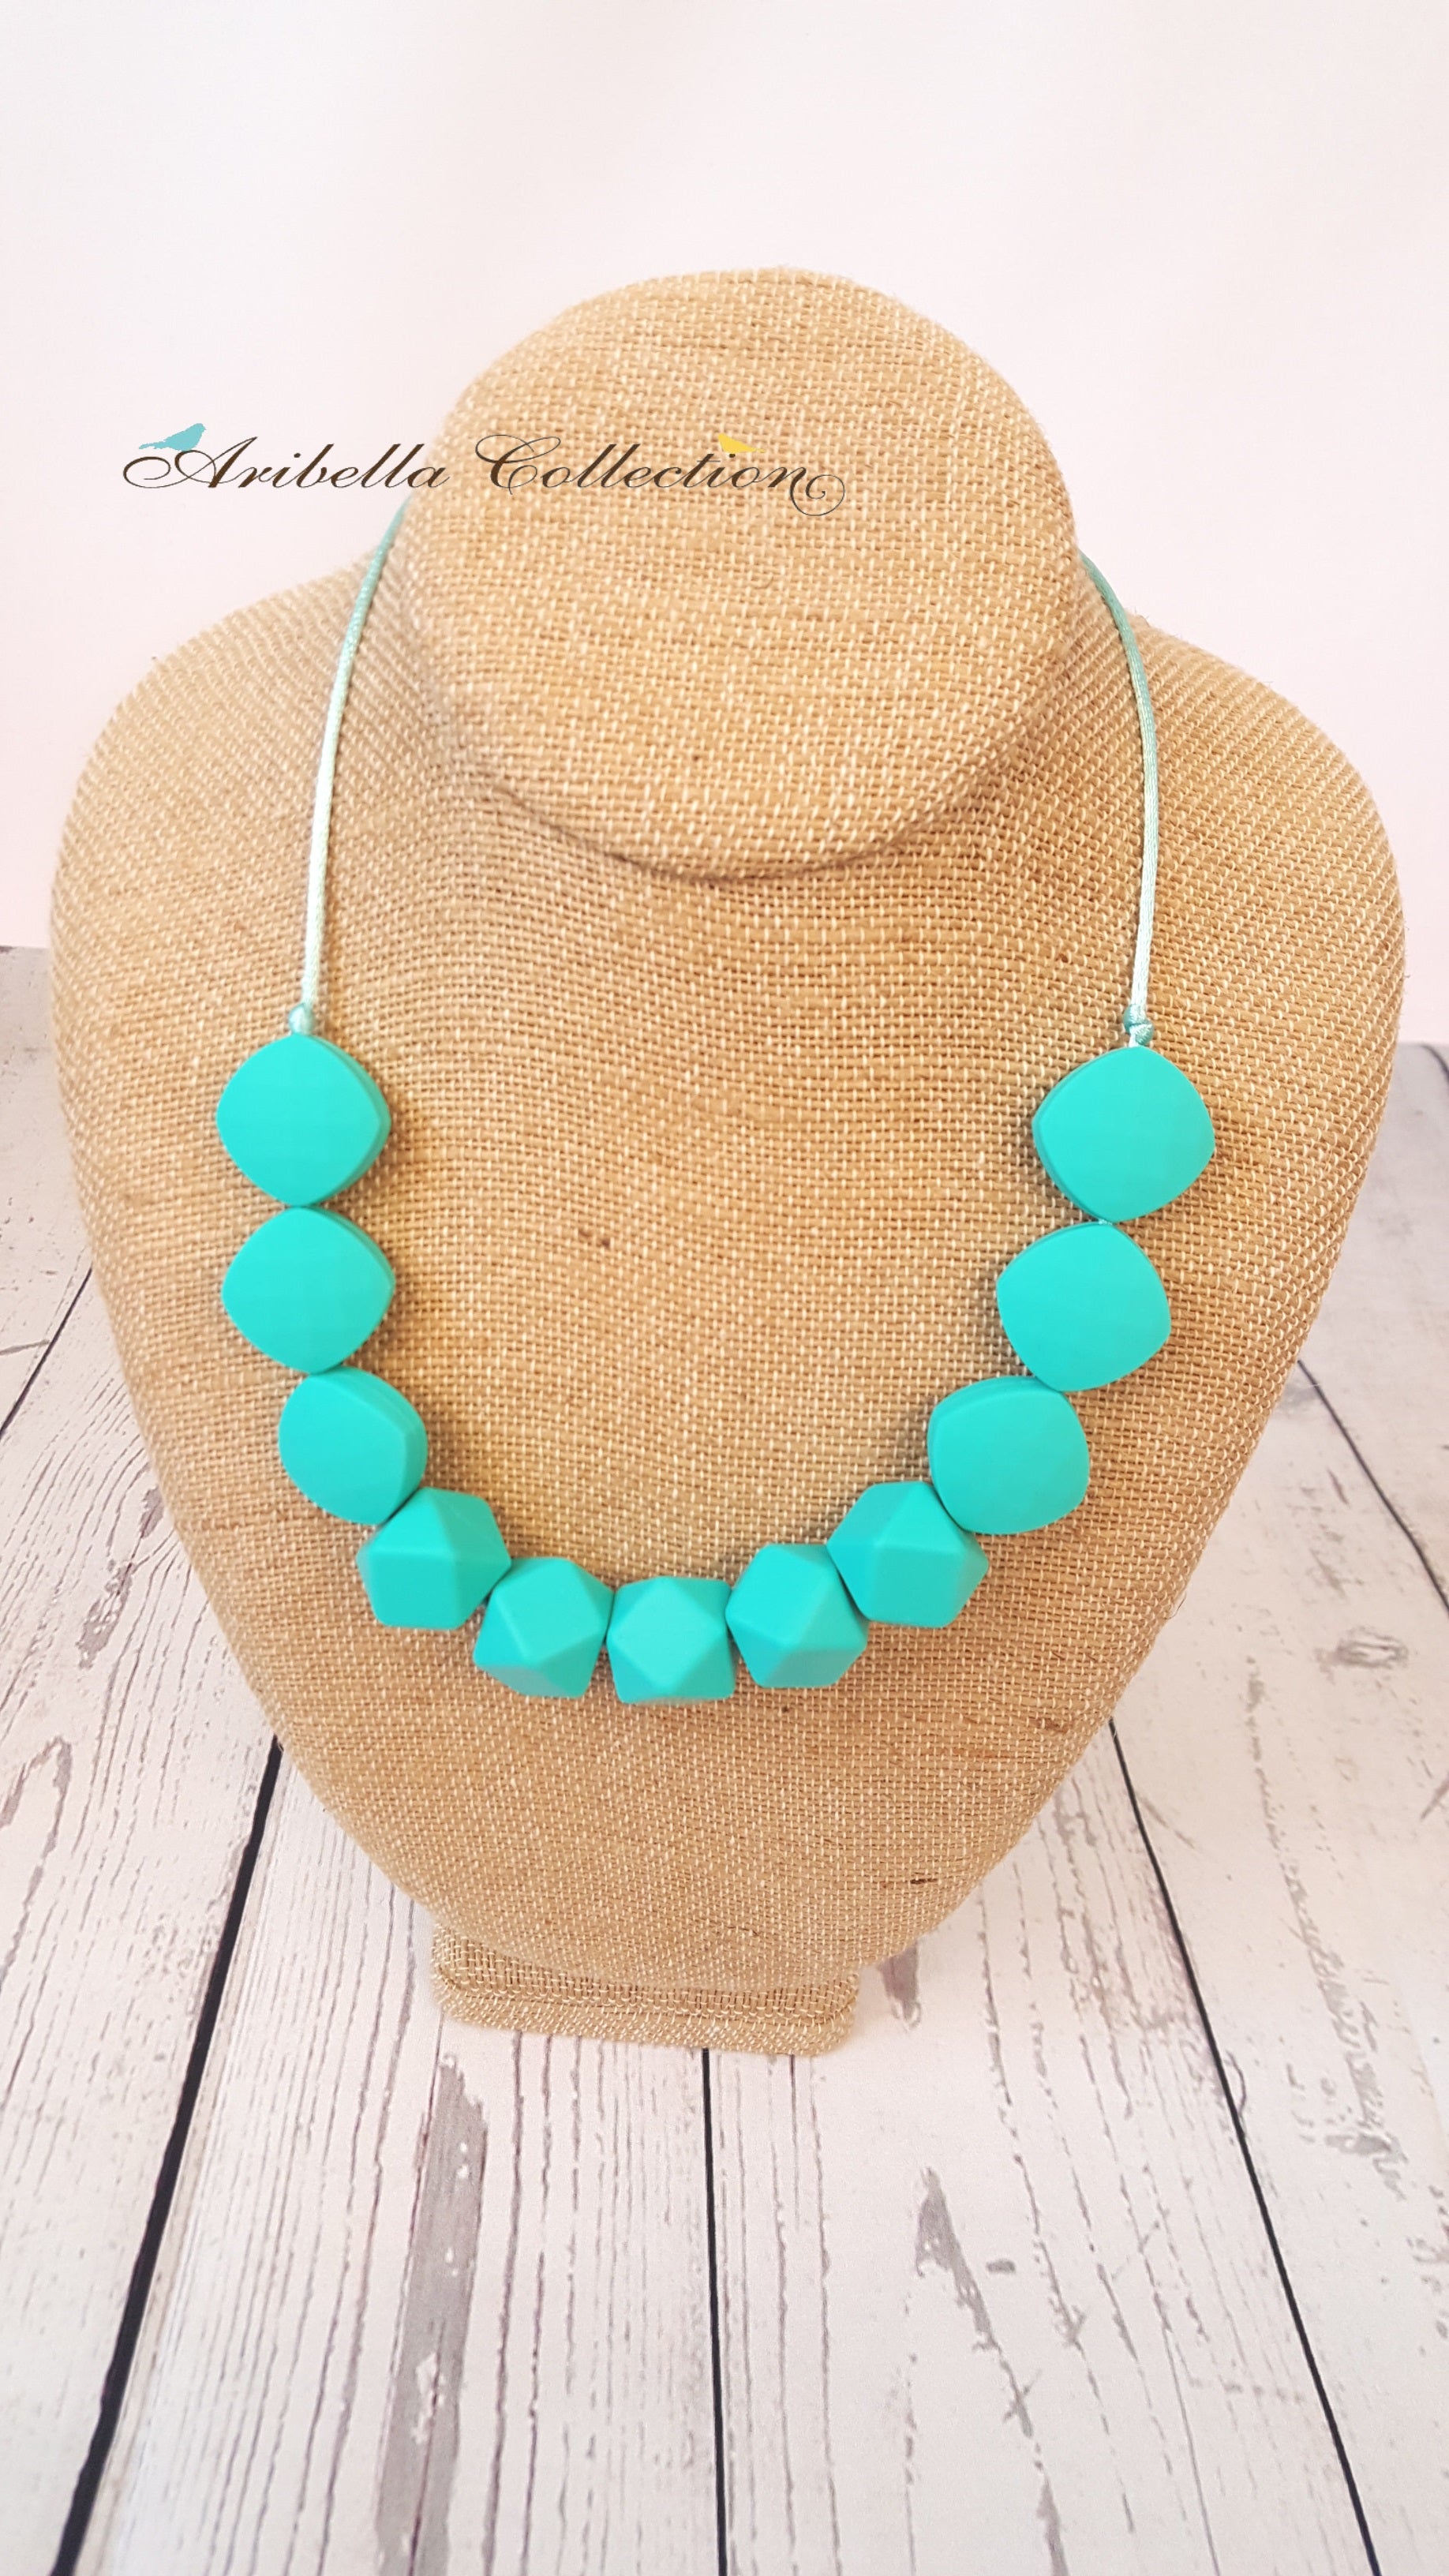 Silicone Necklace - Turquoise - 2 Shapes - Aribella Collection, Inc.